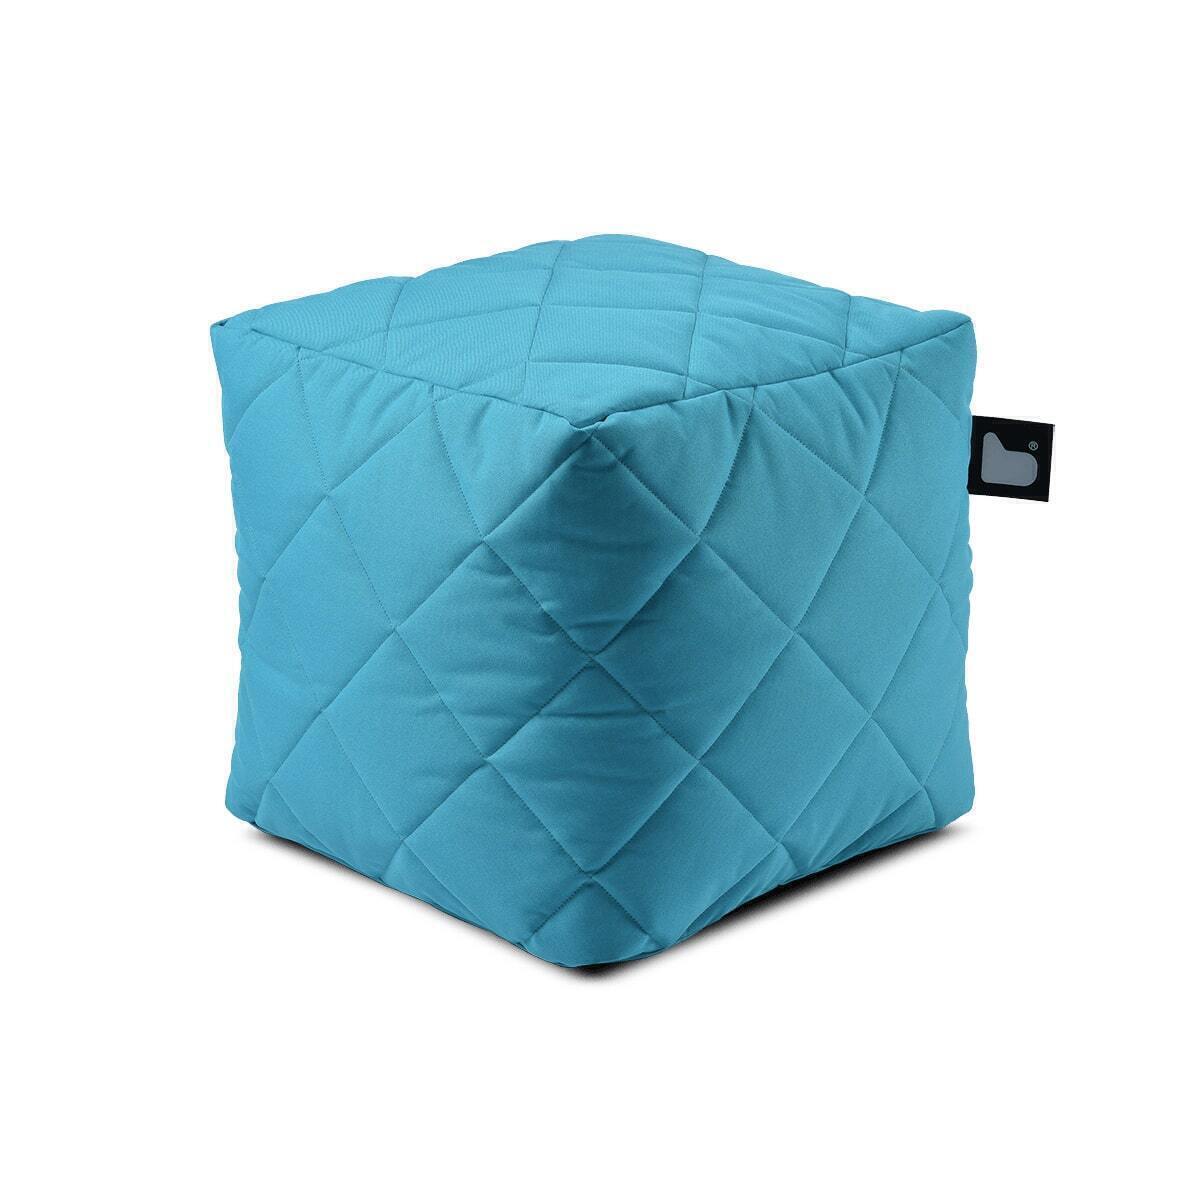 Extreme Lounging - Quilted Bean Box  - Aqua product image